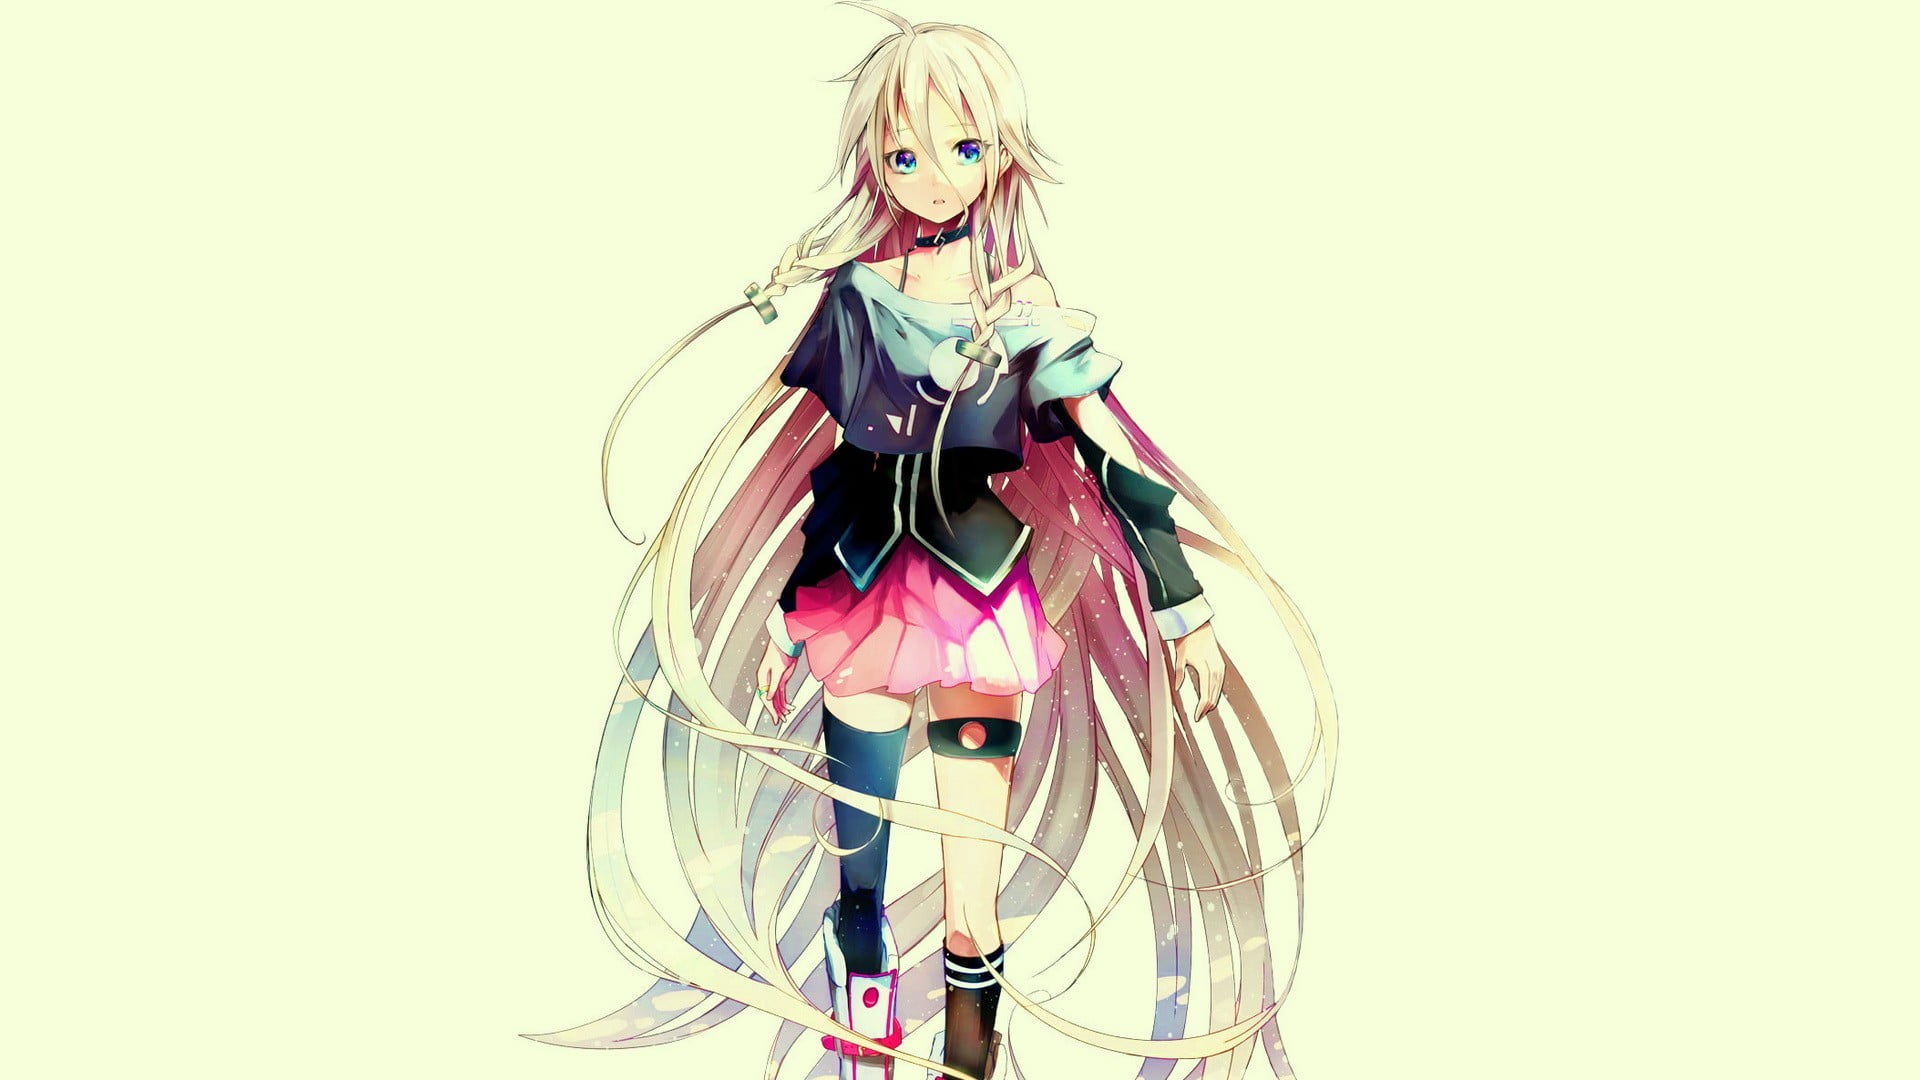 Ia From Vocaloid Hd Wallpaper Wallpaper Flare